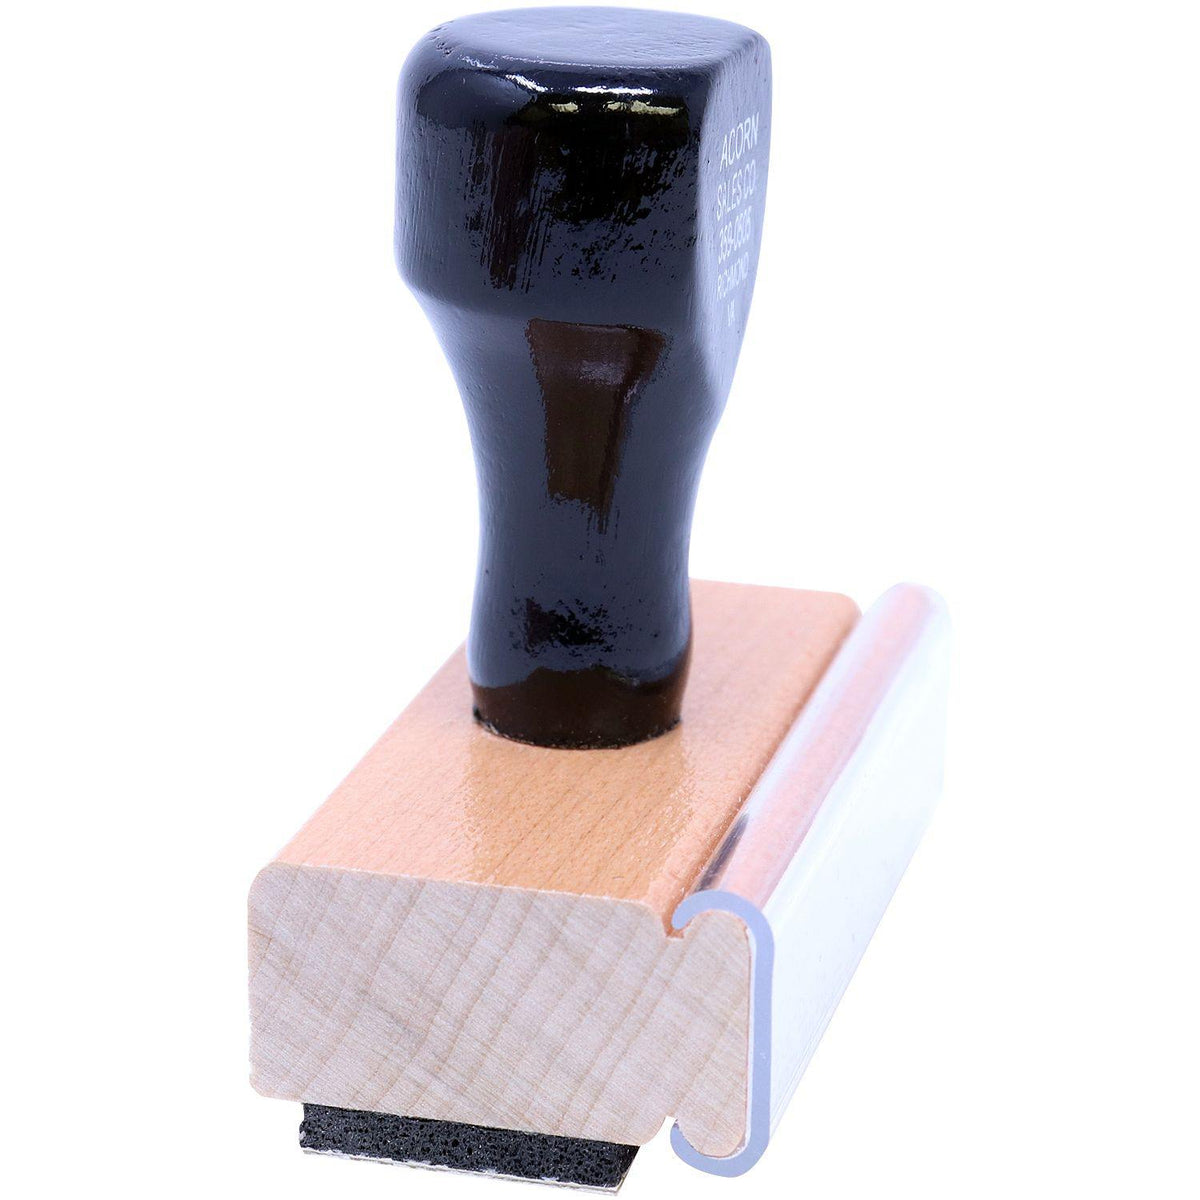 Side View of X-Rays Rubber Stamp at an Angle